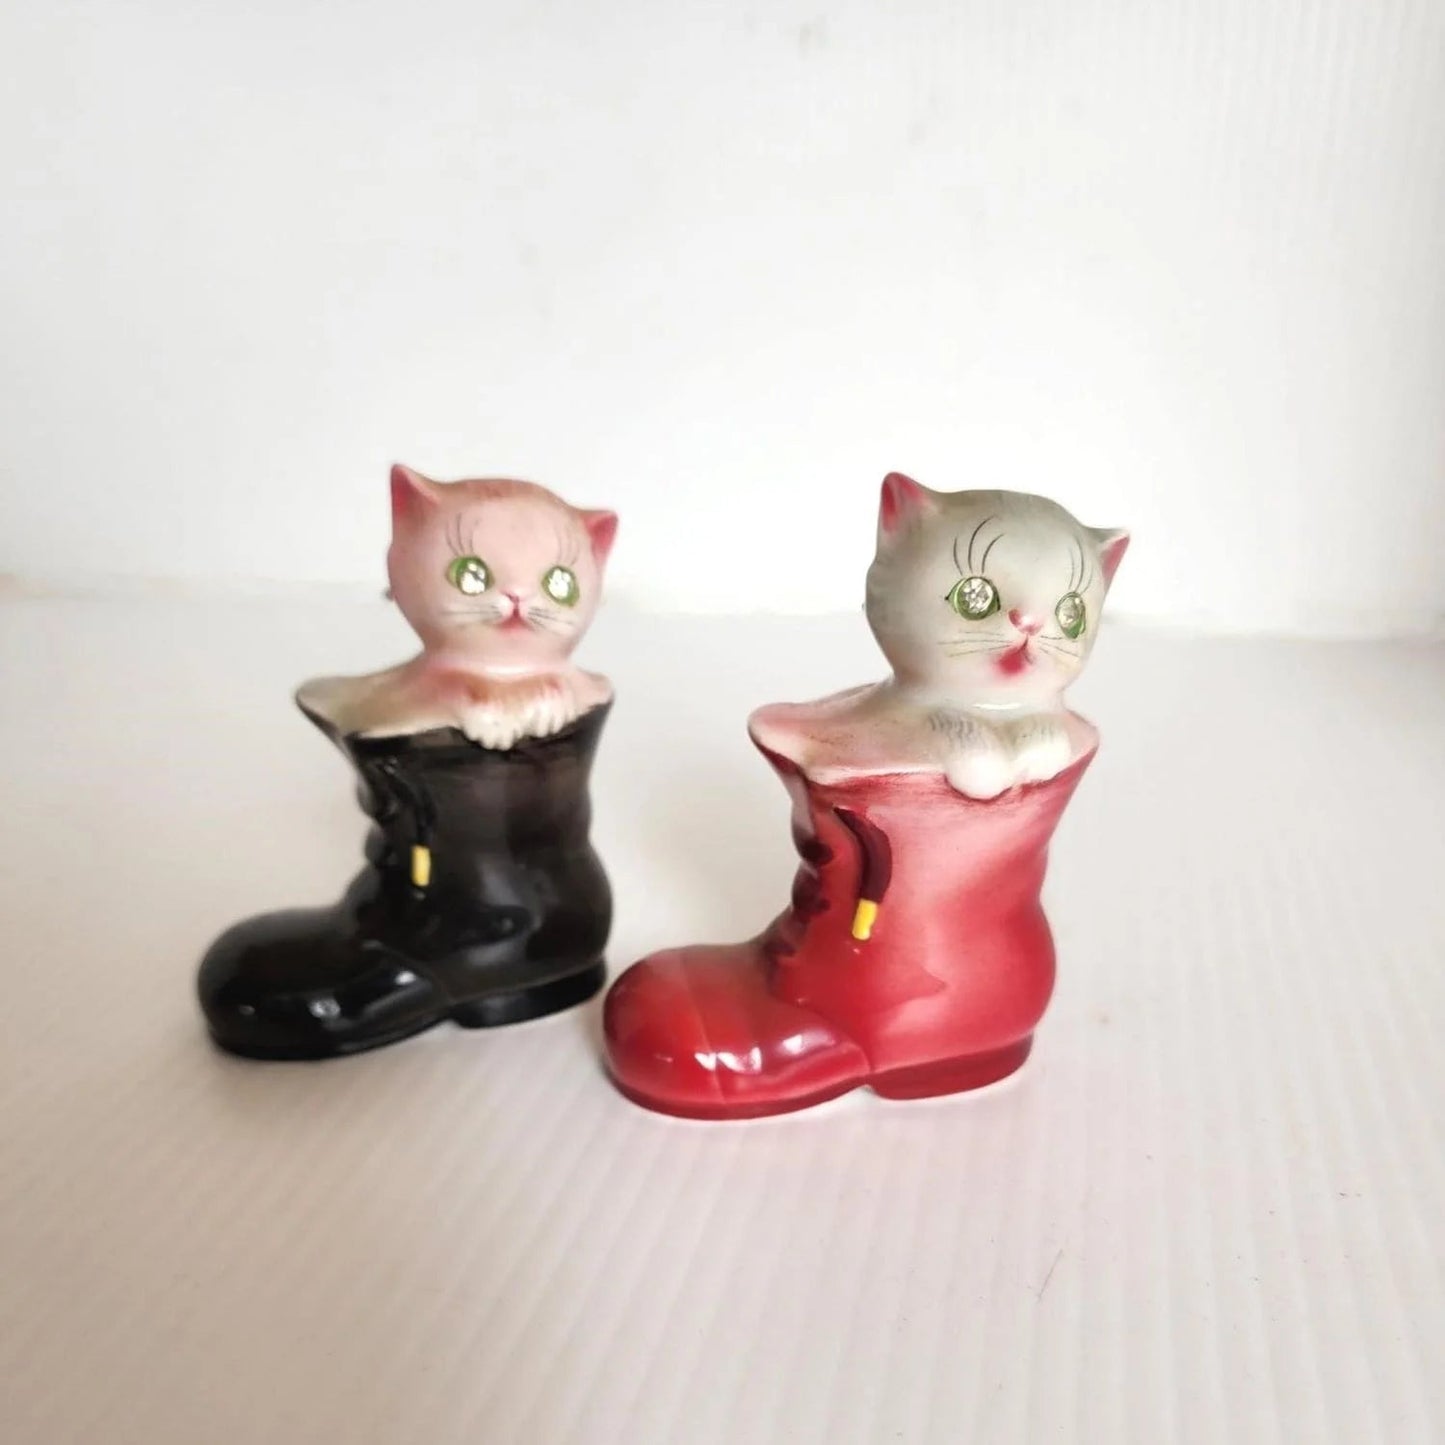 Two ceramic cat figurines sitting in boots, showcasing a charming and whimsical display of feline companionship.